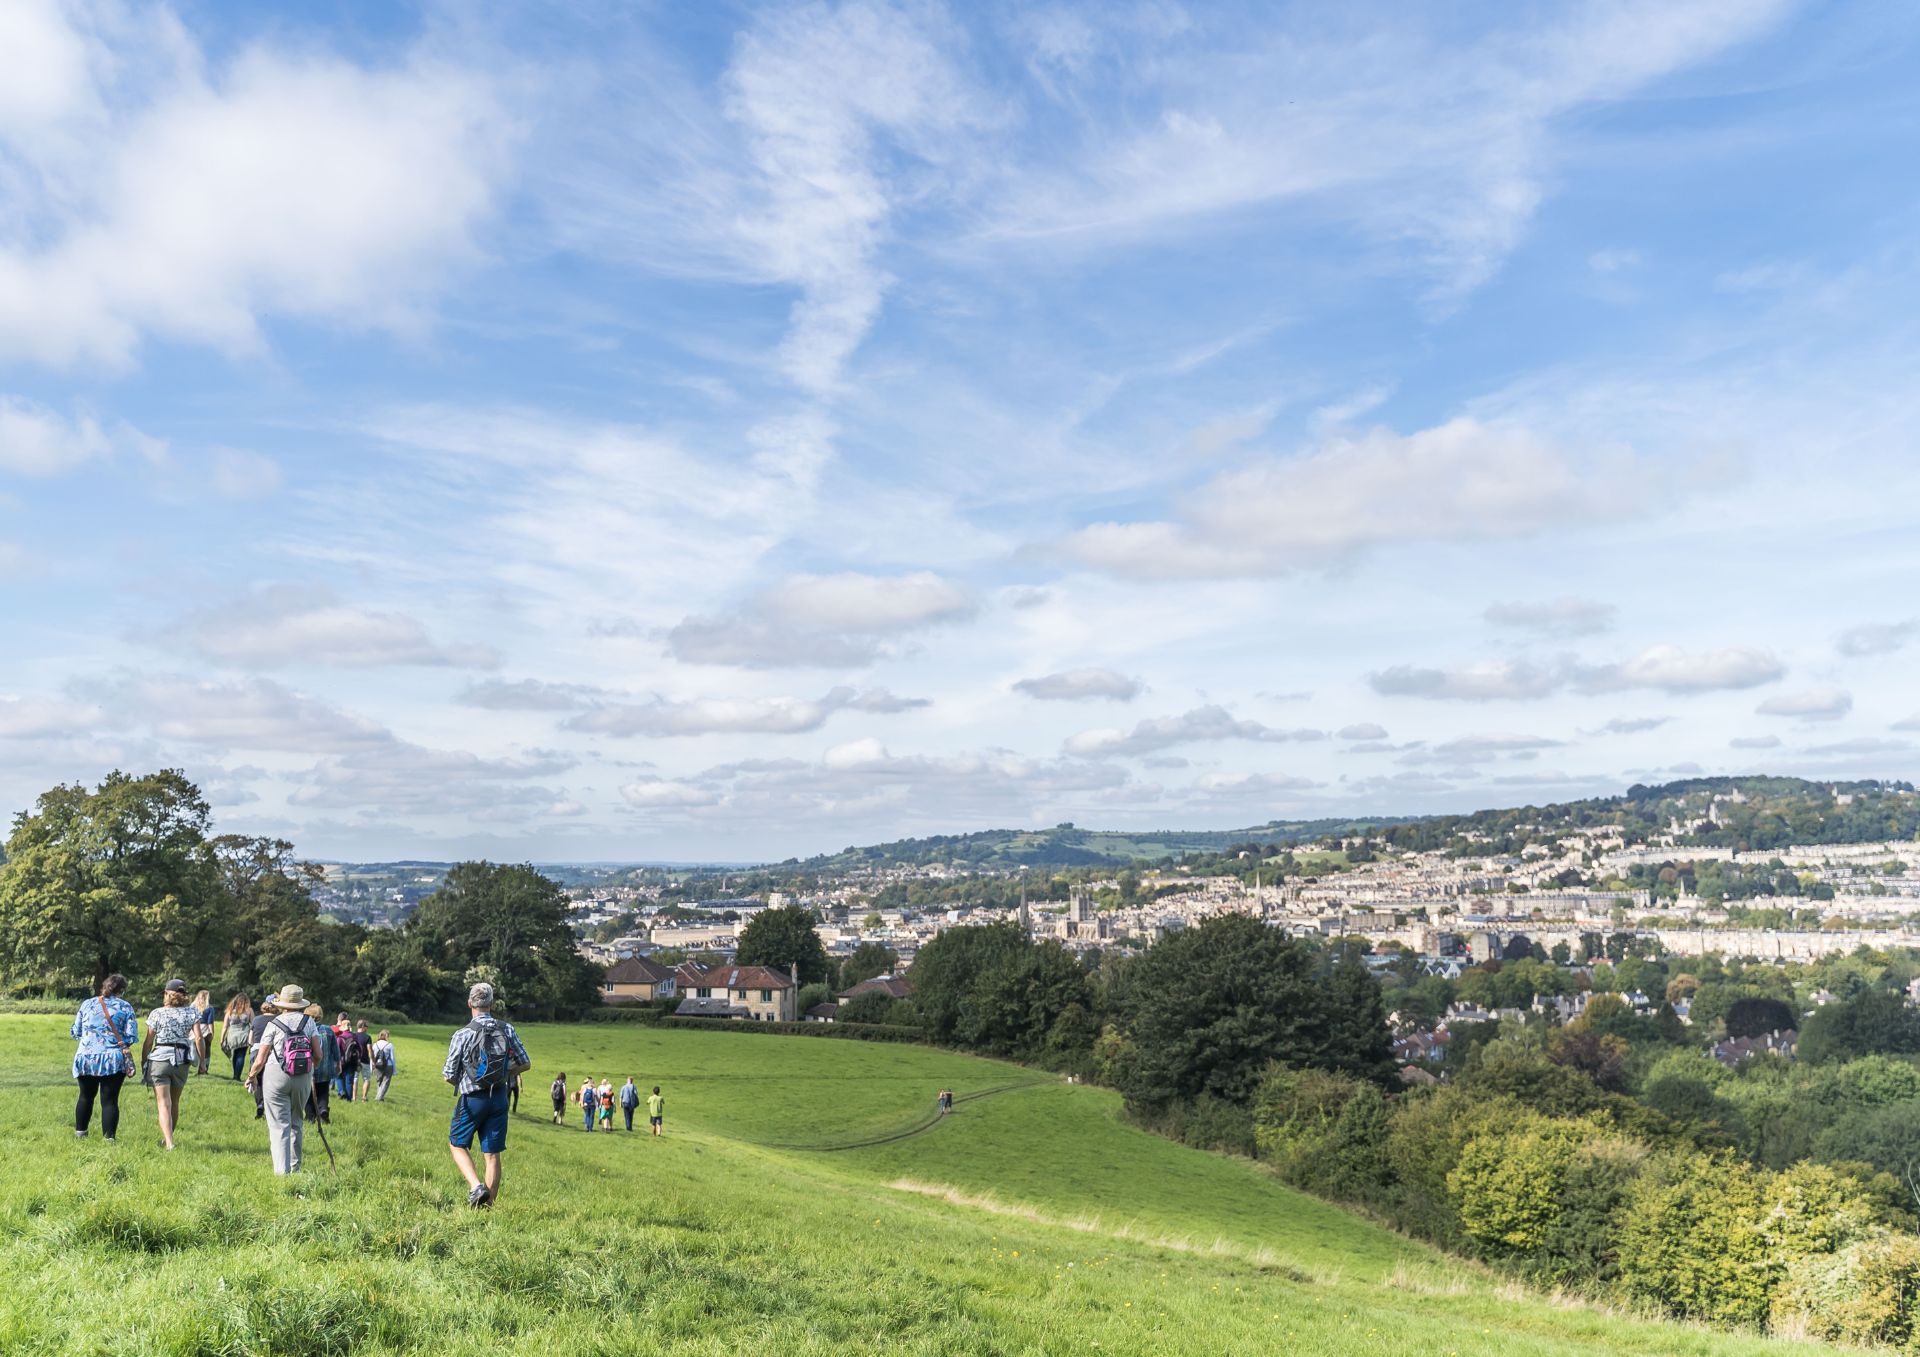 A group of walkers on a green hillside with views across a city and a bright blue skyline